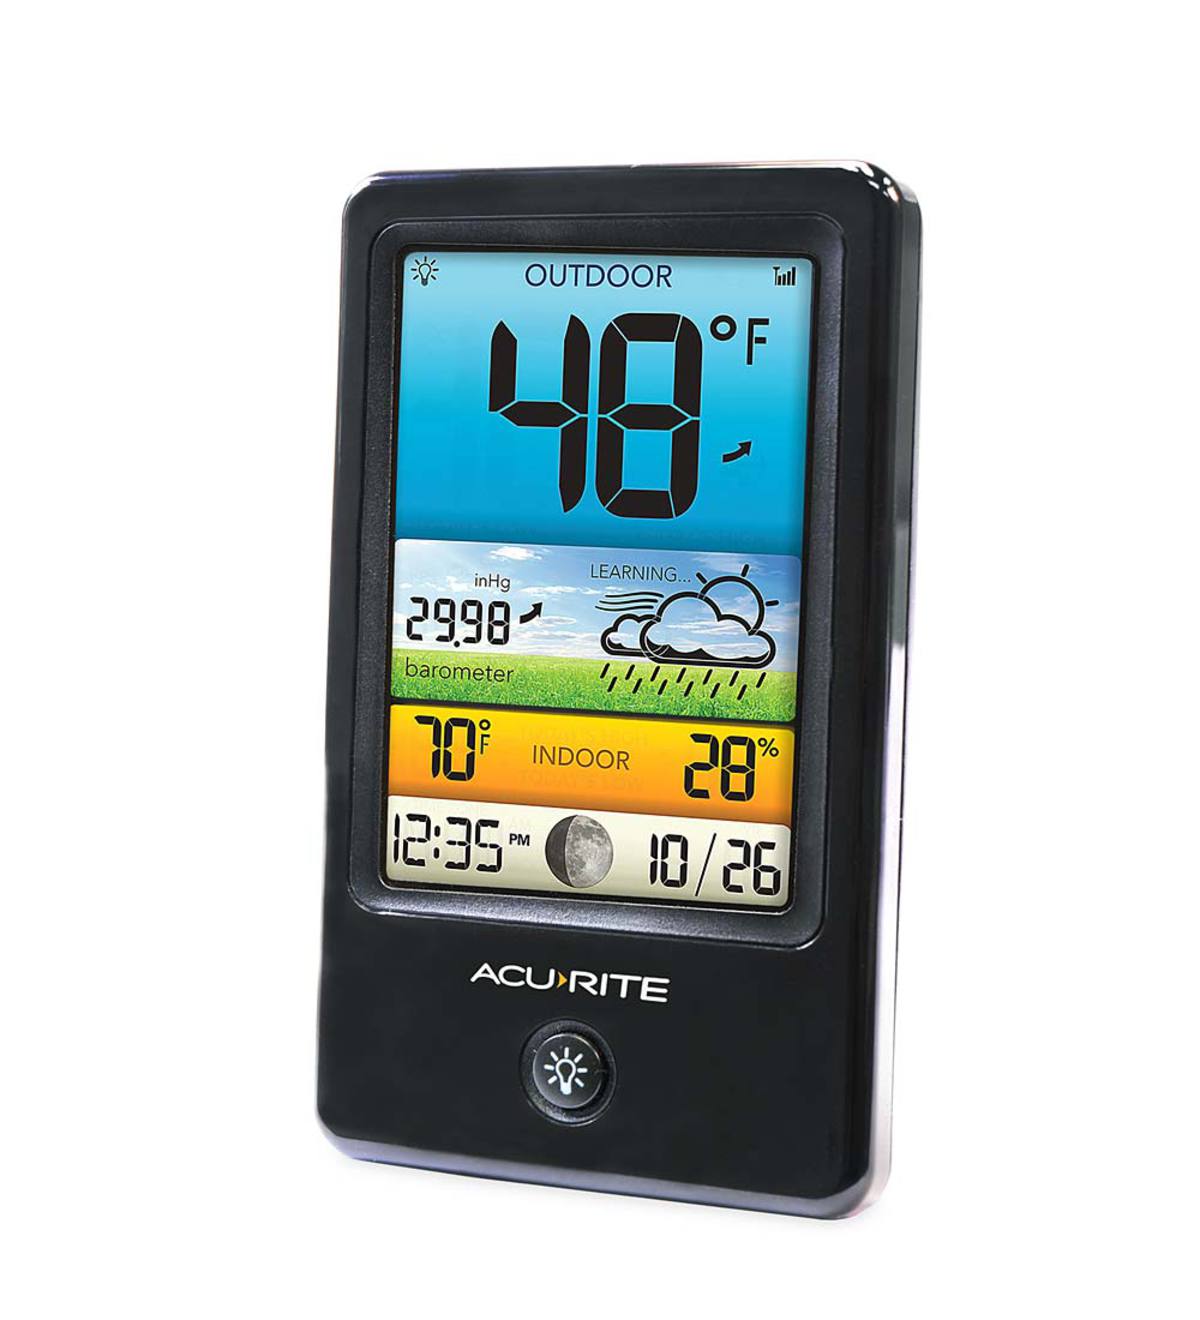 AcuRite® Color LCD Weather Forecaster